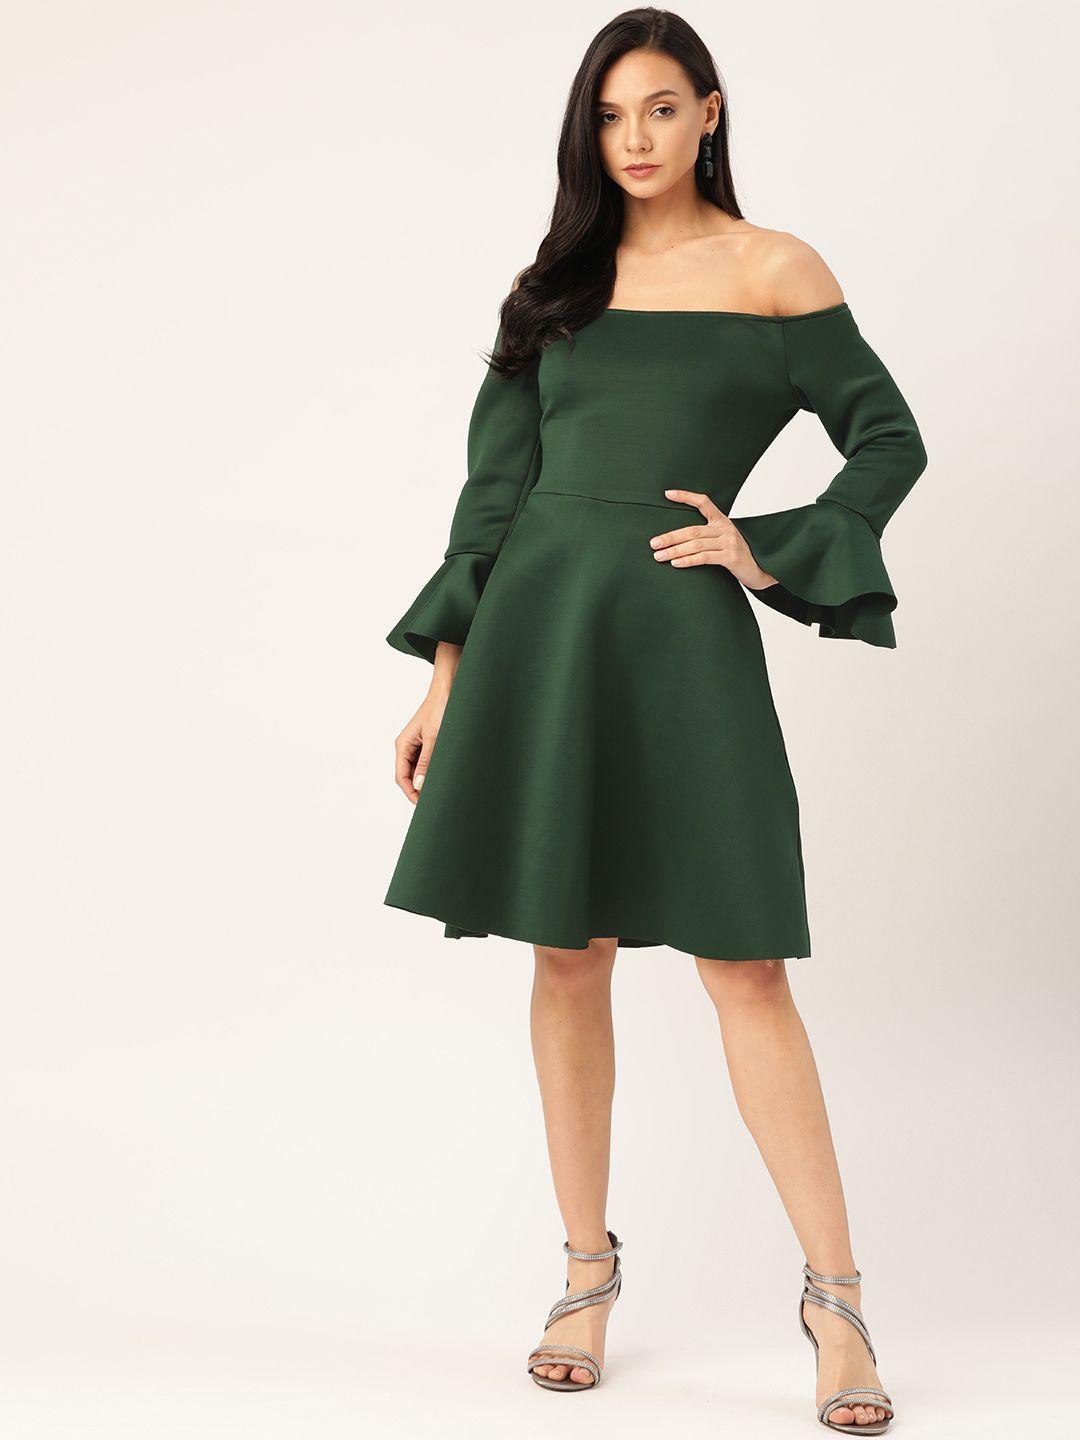 dodo & moa women teal green solid off-shoulder fit and flare dress with bell sleeves